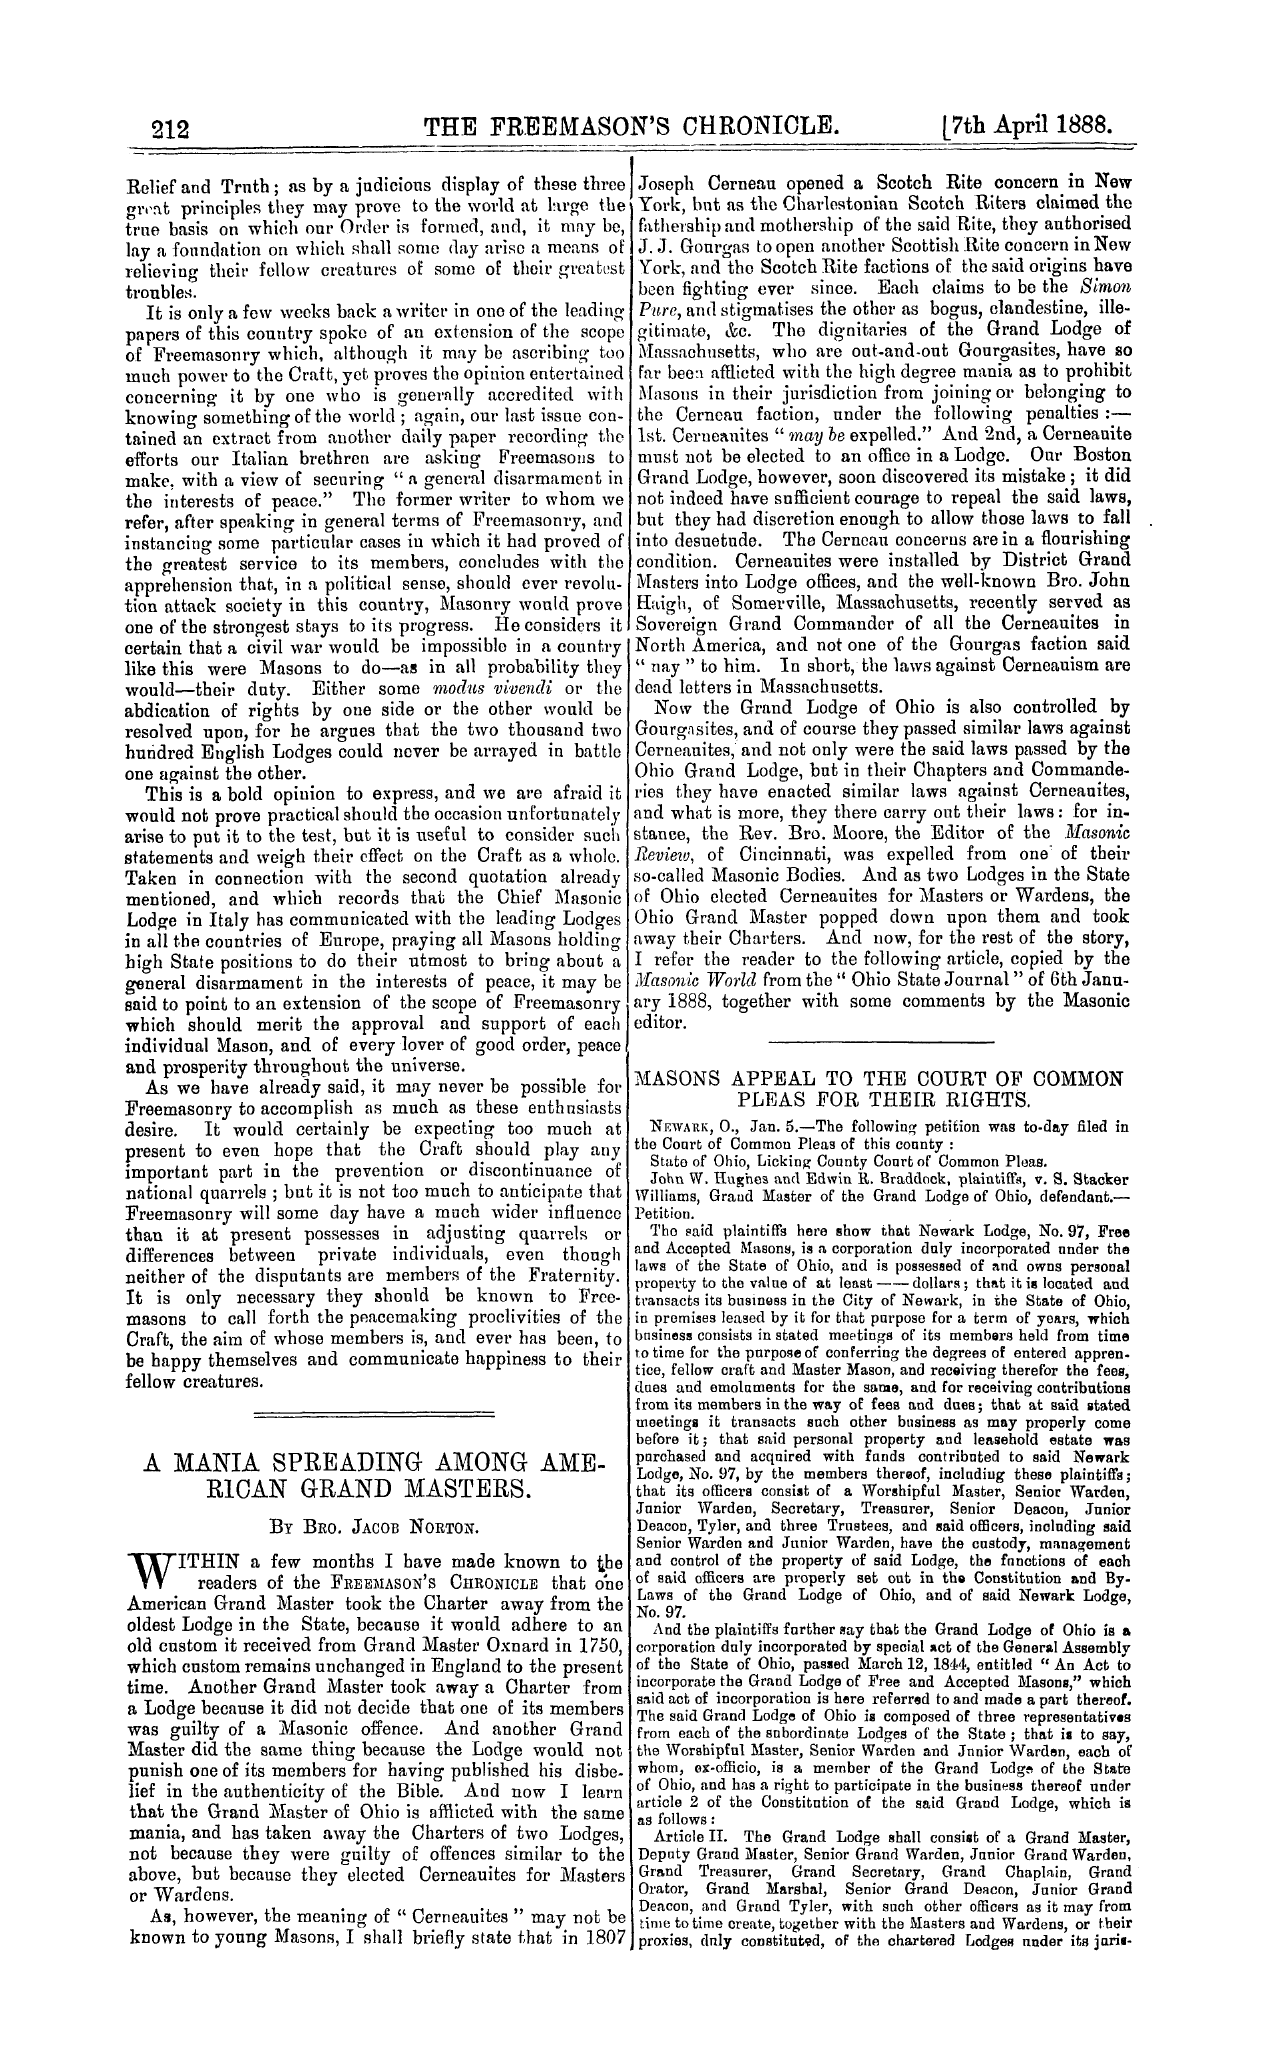 The Freemason's Chronicle: 1888-04-07 - A Mania Spreading Among American Grand Masters.